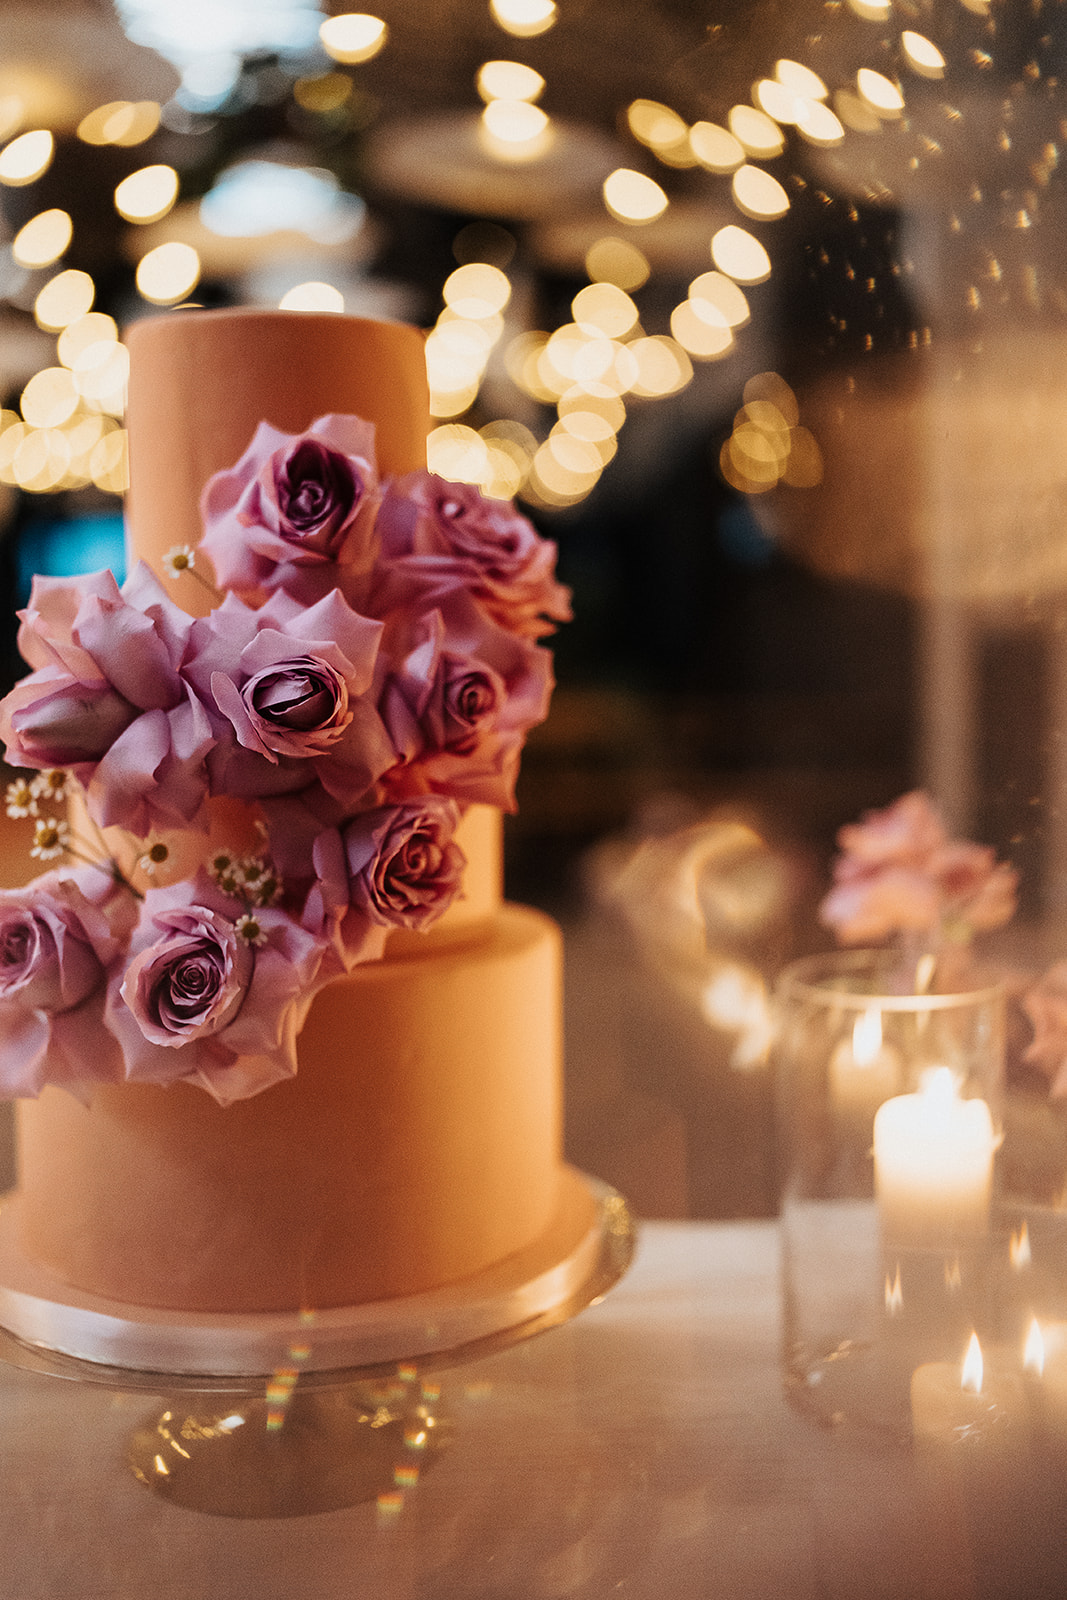 Cake with purple roses  | Chocolate Factory Wedding Derby